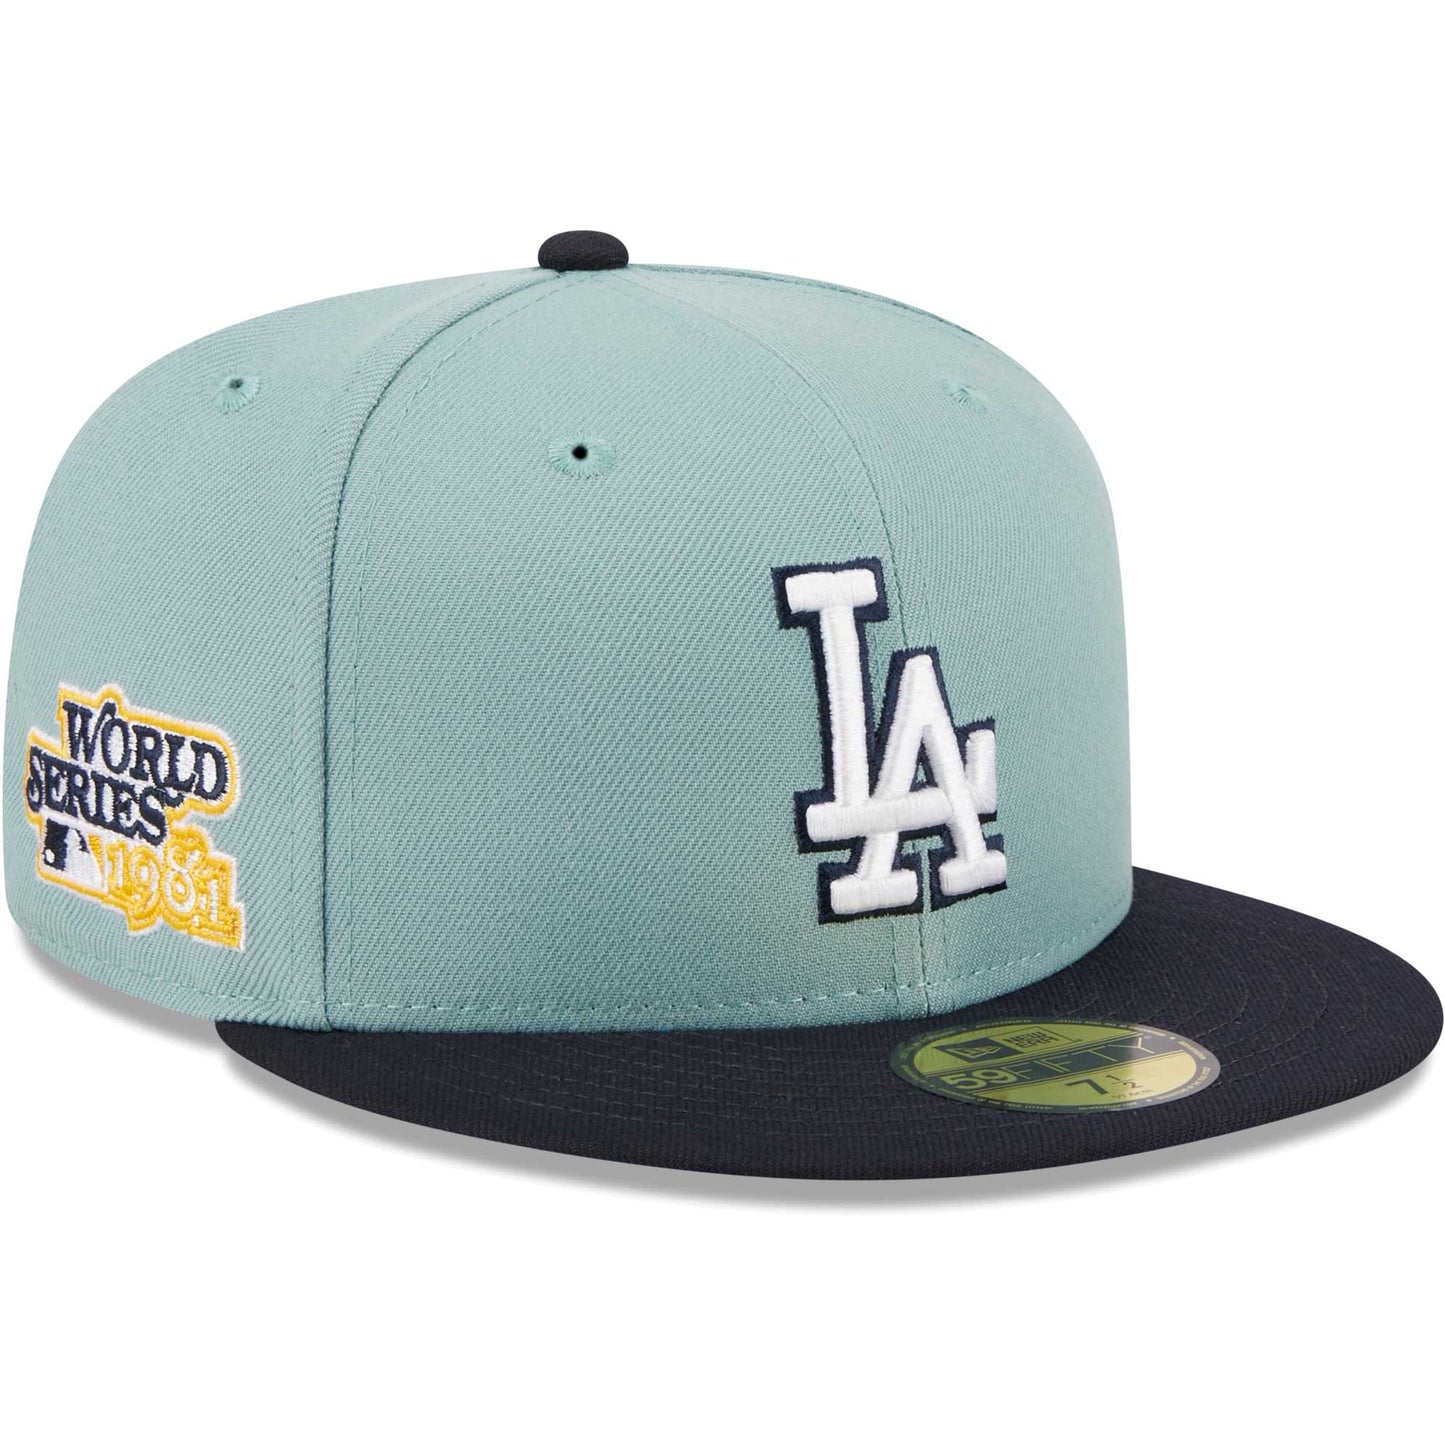 Los Angeles Dodgers New Era Beach Kiss 59FIFTY Fitted Hat - Light Blue/Navy